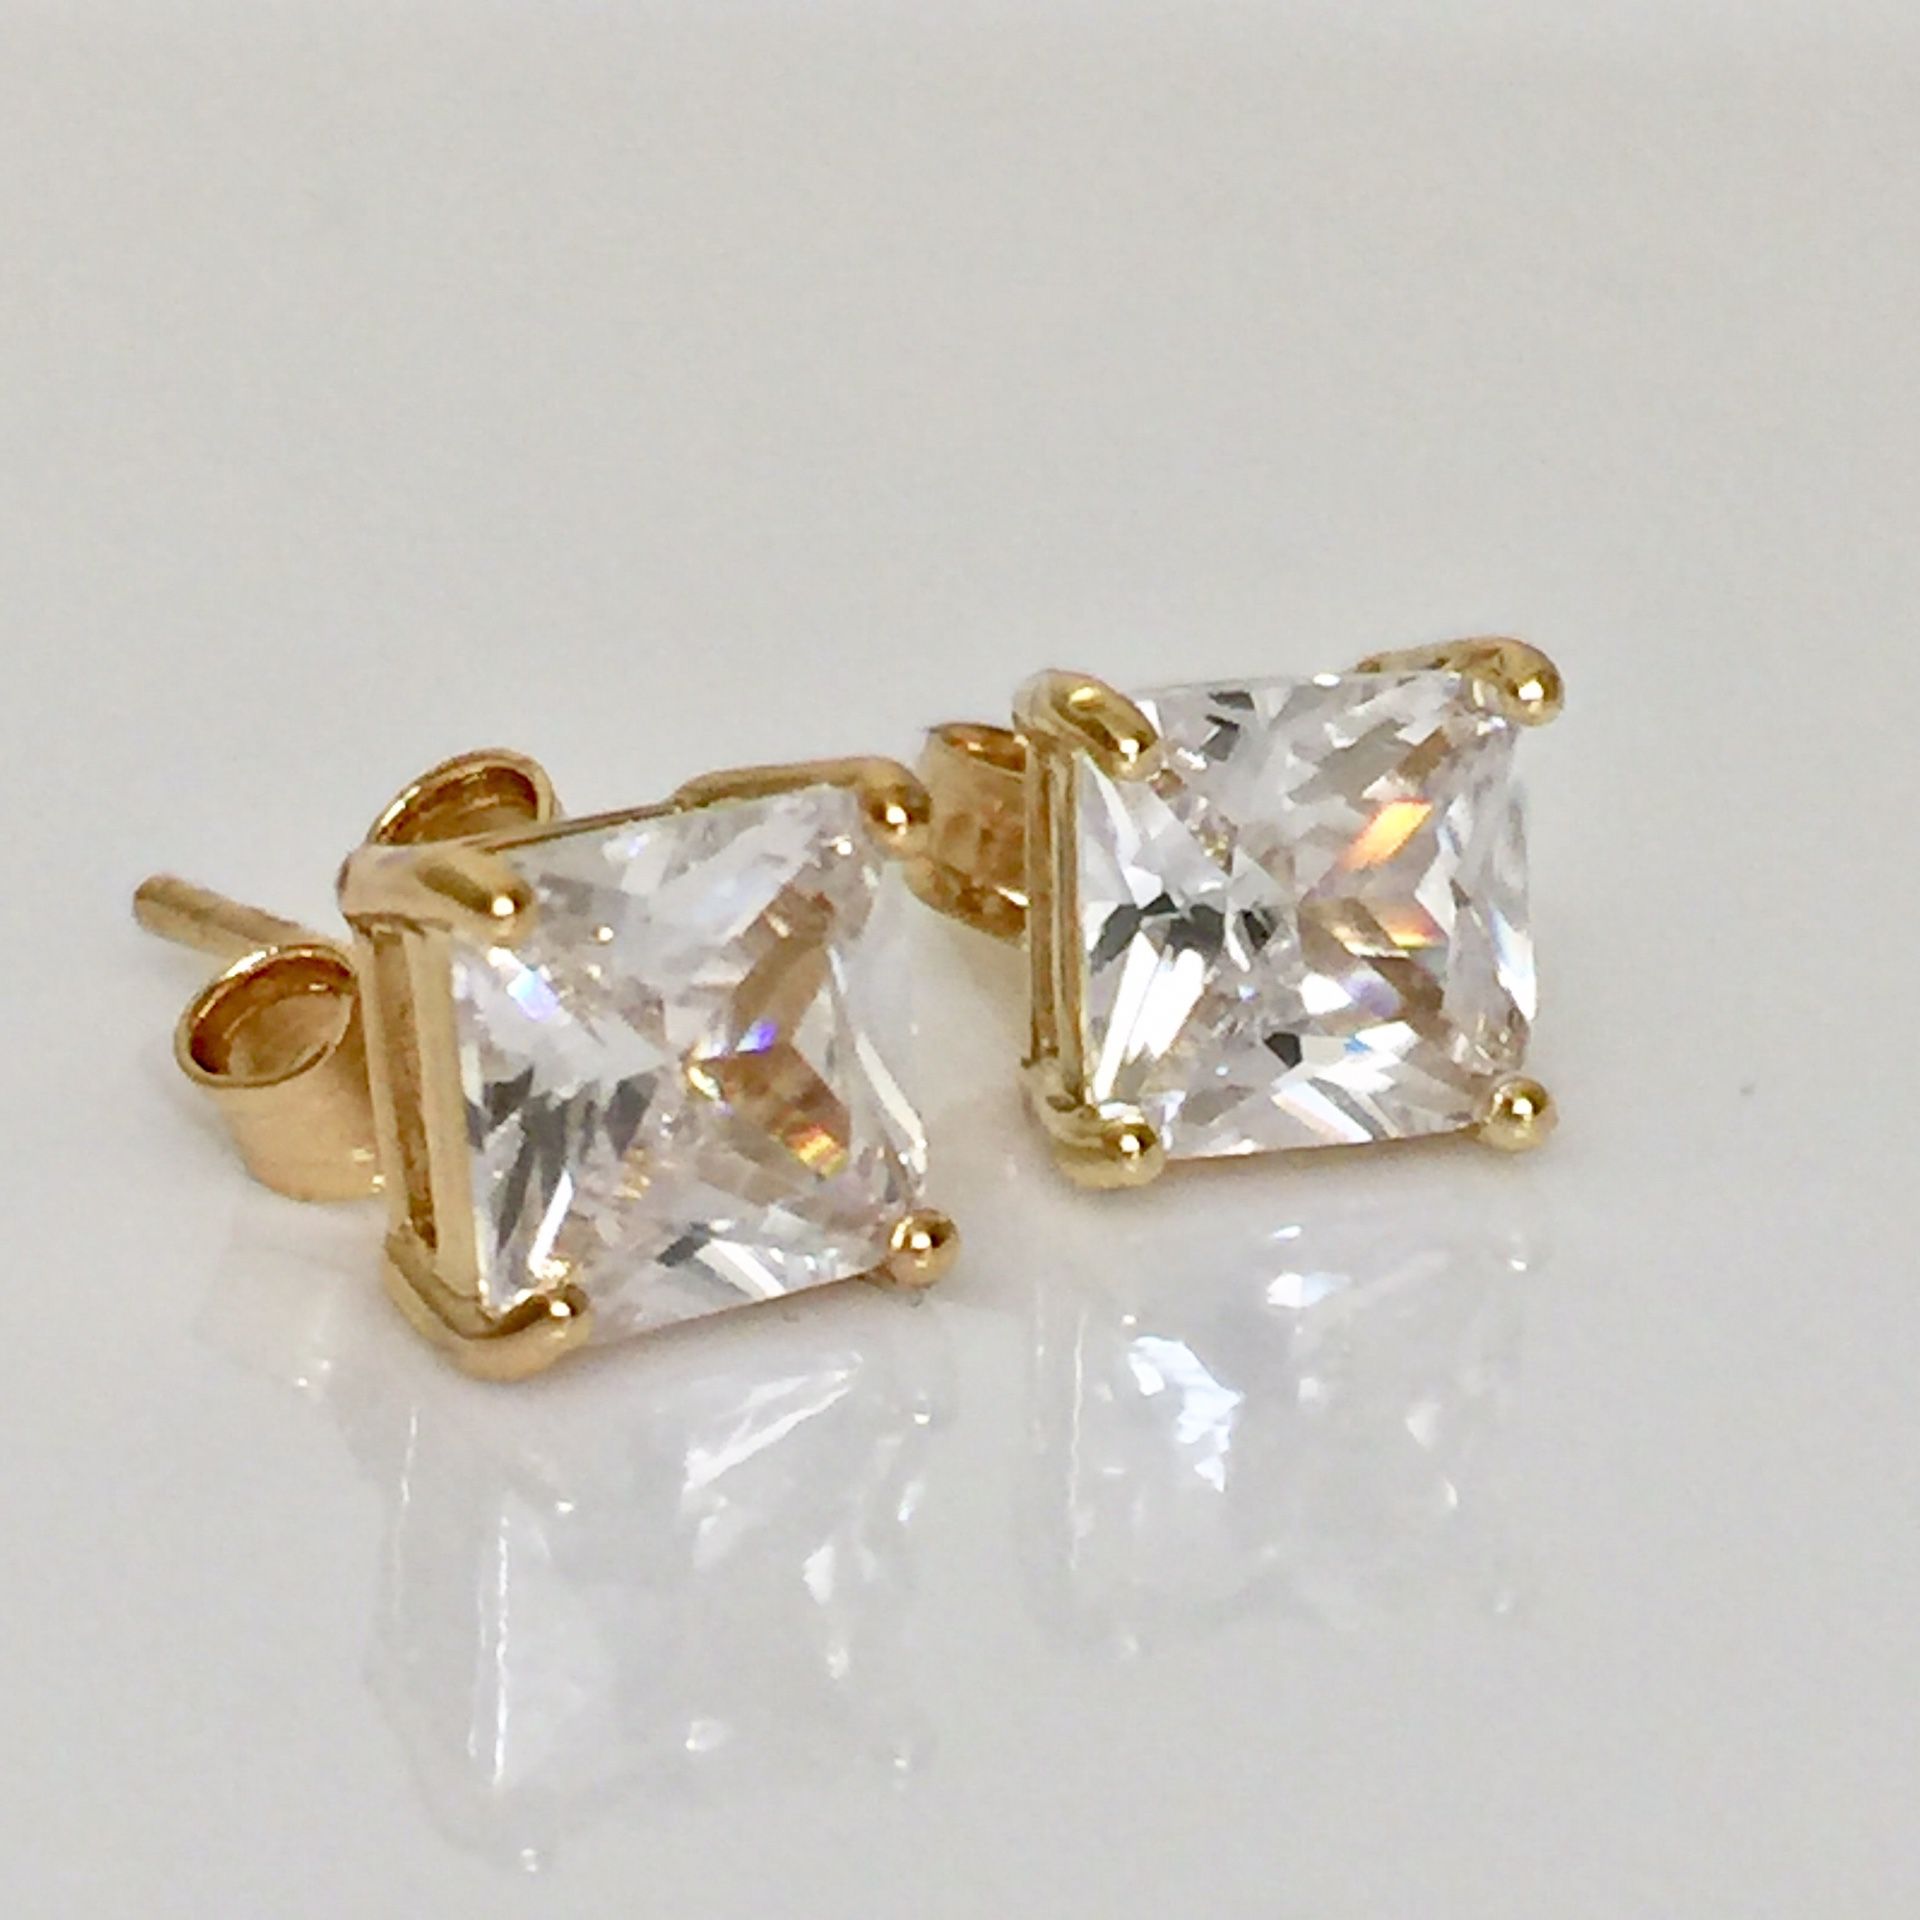 Gold filled square crystal studs earrings jewelry accessory 4mm